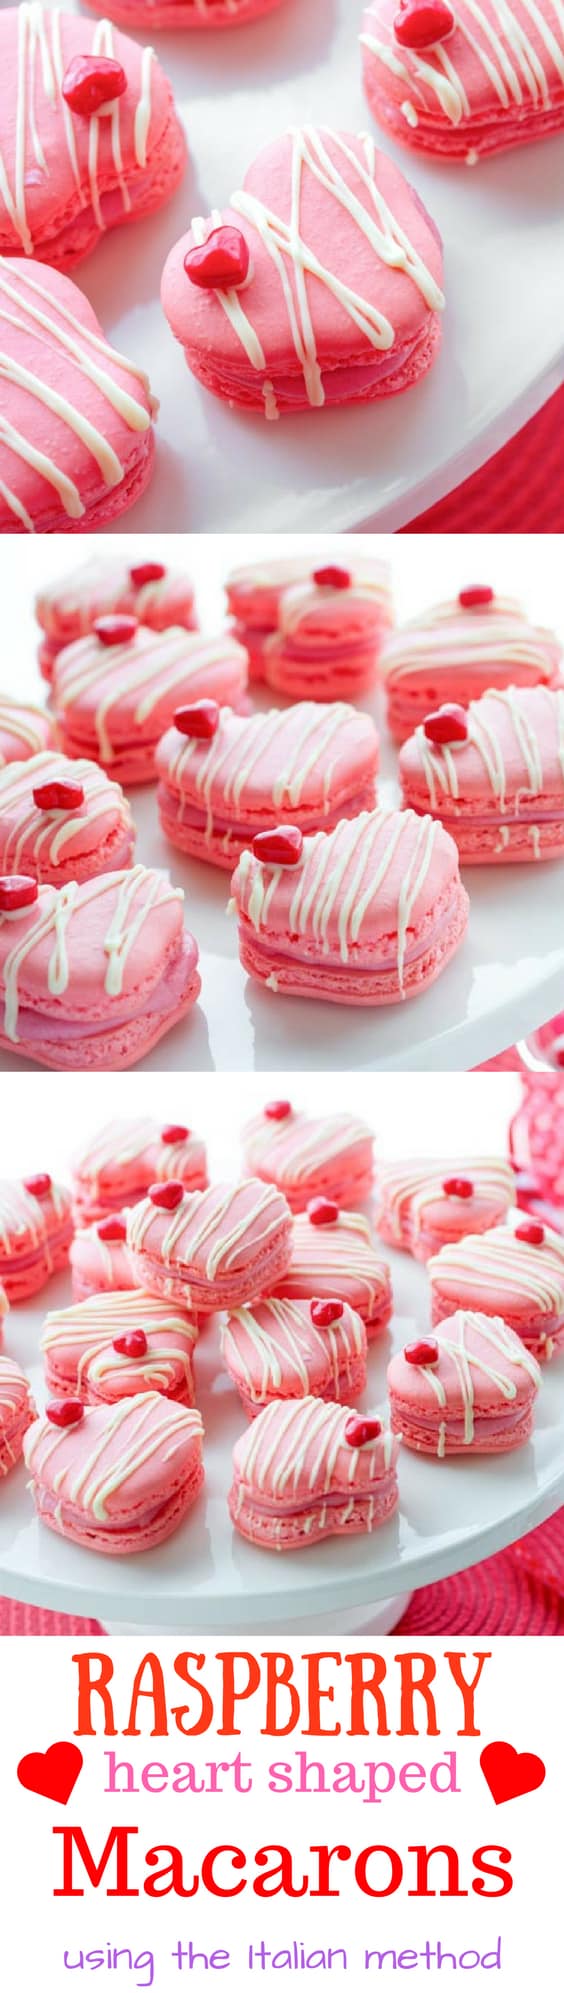 Raspberry Macarons - simple heart shaped macarons using the Italian method, with tips, tricks and how-to instructions for the best cookies. Filled with a fresh raspberry buttercream and topped with a drizzle of white chocolate. Great for Valentine's Day! www.savingdessert.com 